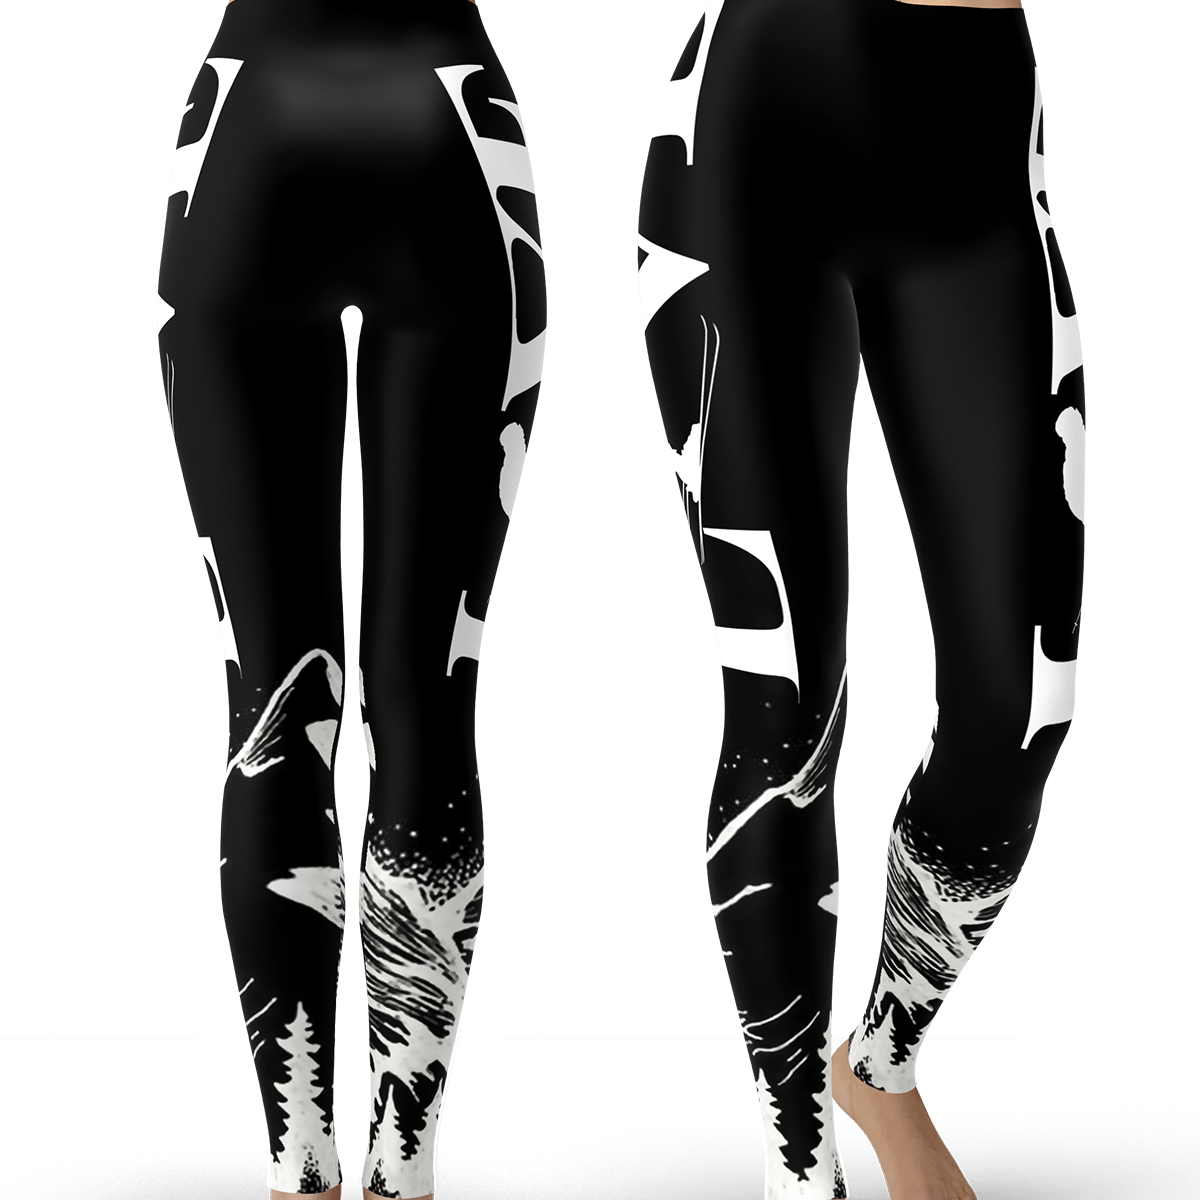 Blank Black Leggings Mockup Front And Side View Isolated Stock Photo -  Download Image Now - iStock